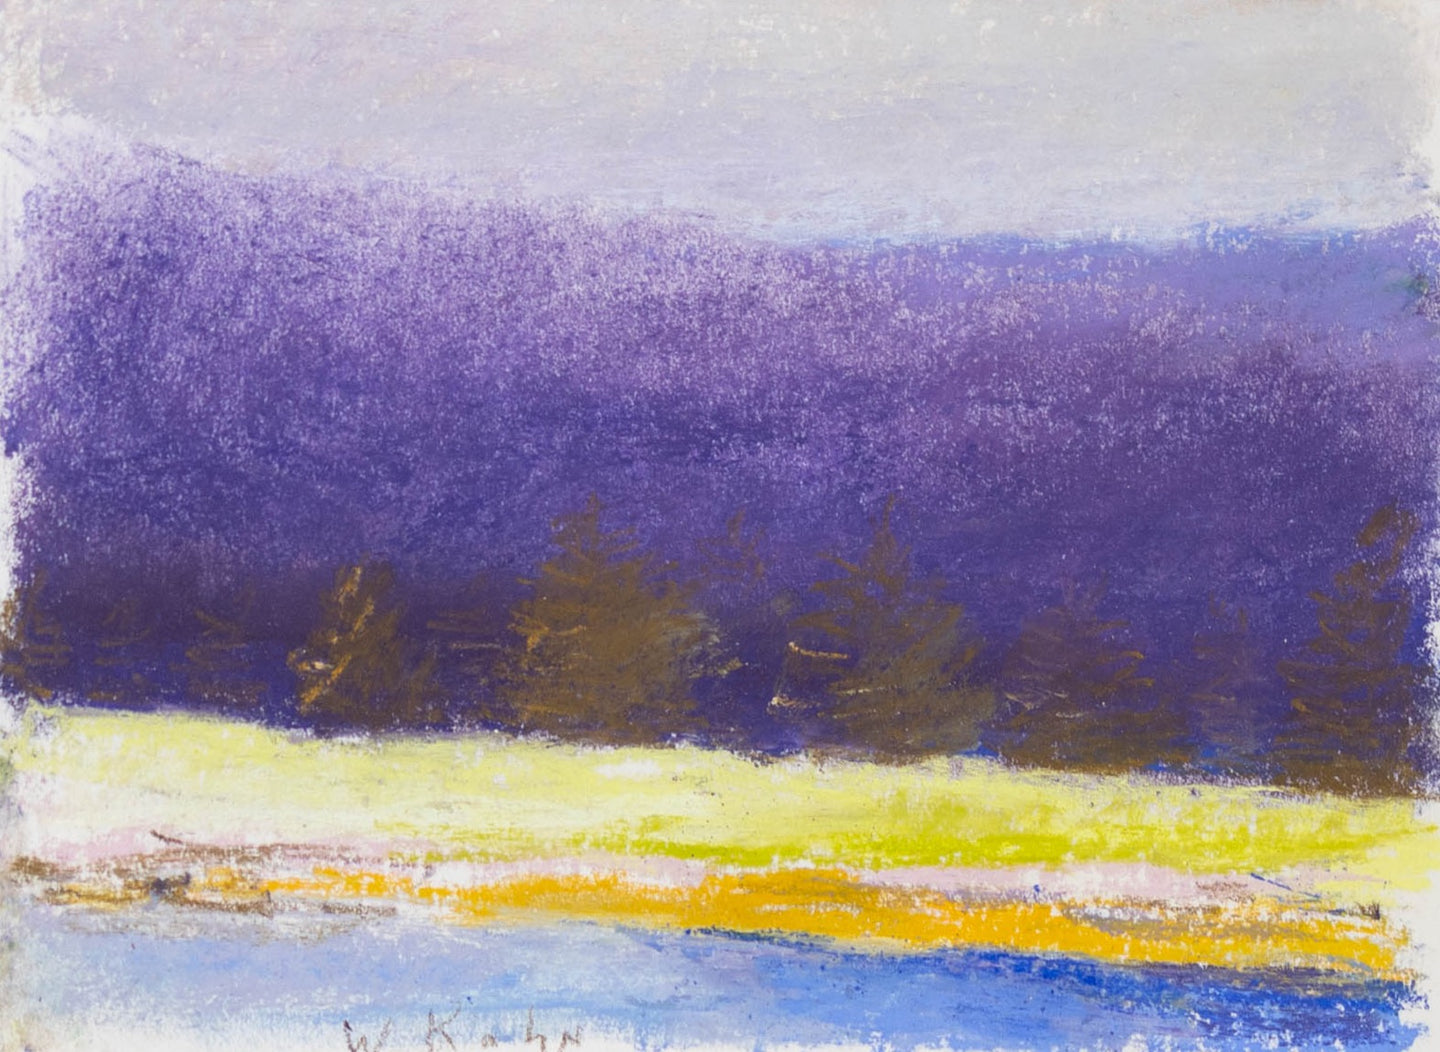 Wolf Kahn, Edge of the Christmas Tree Field, 1994, Pastel on paper, 9 x 12 inches, Wolf Kahn artwork, Wolf Kahn Pastels For Sale, Wolf Kahn Art For Sale